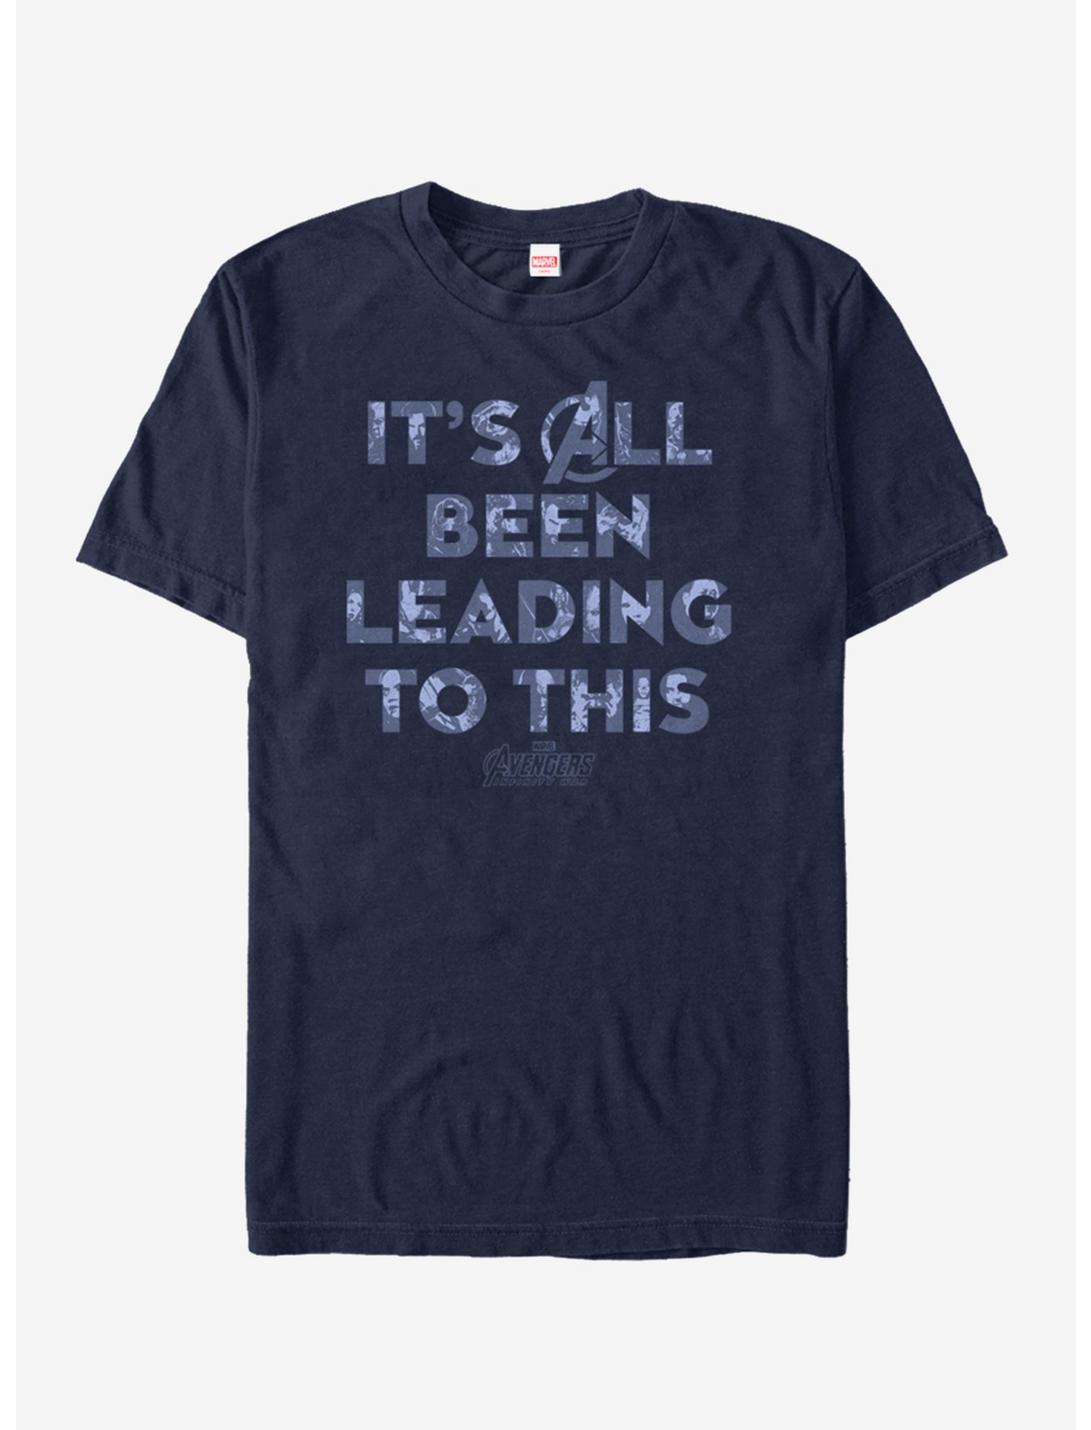 Marvel Avengers Infinity War All Been Leading To This T-Shirt, NAVY, hi-res